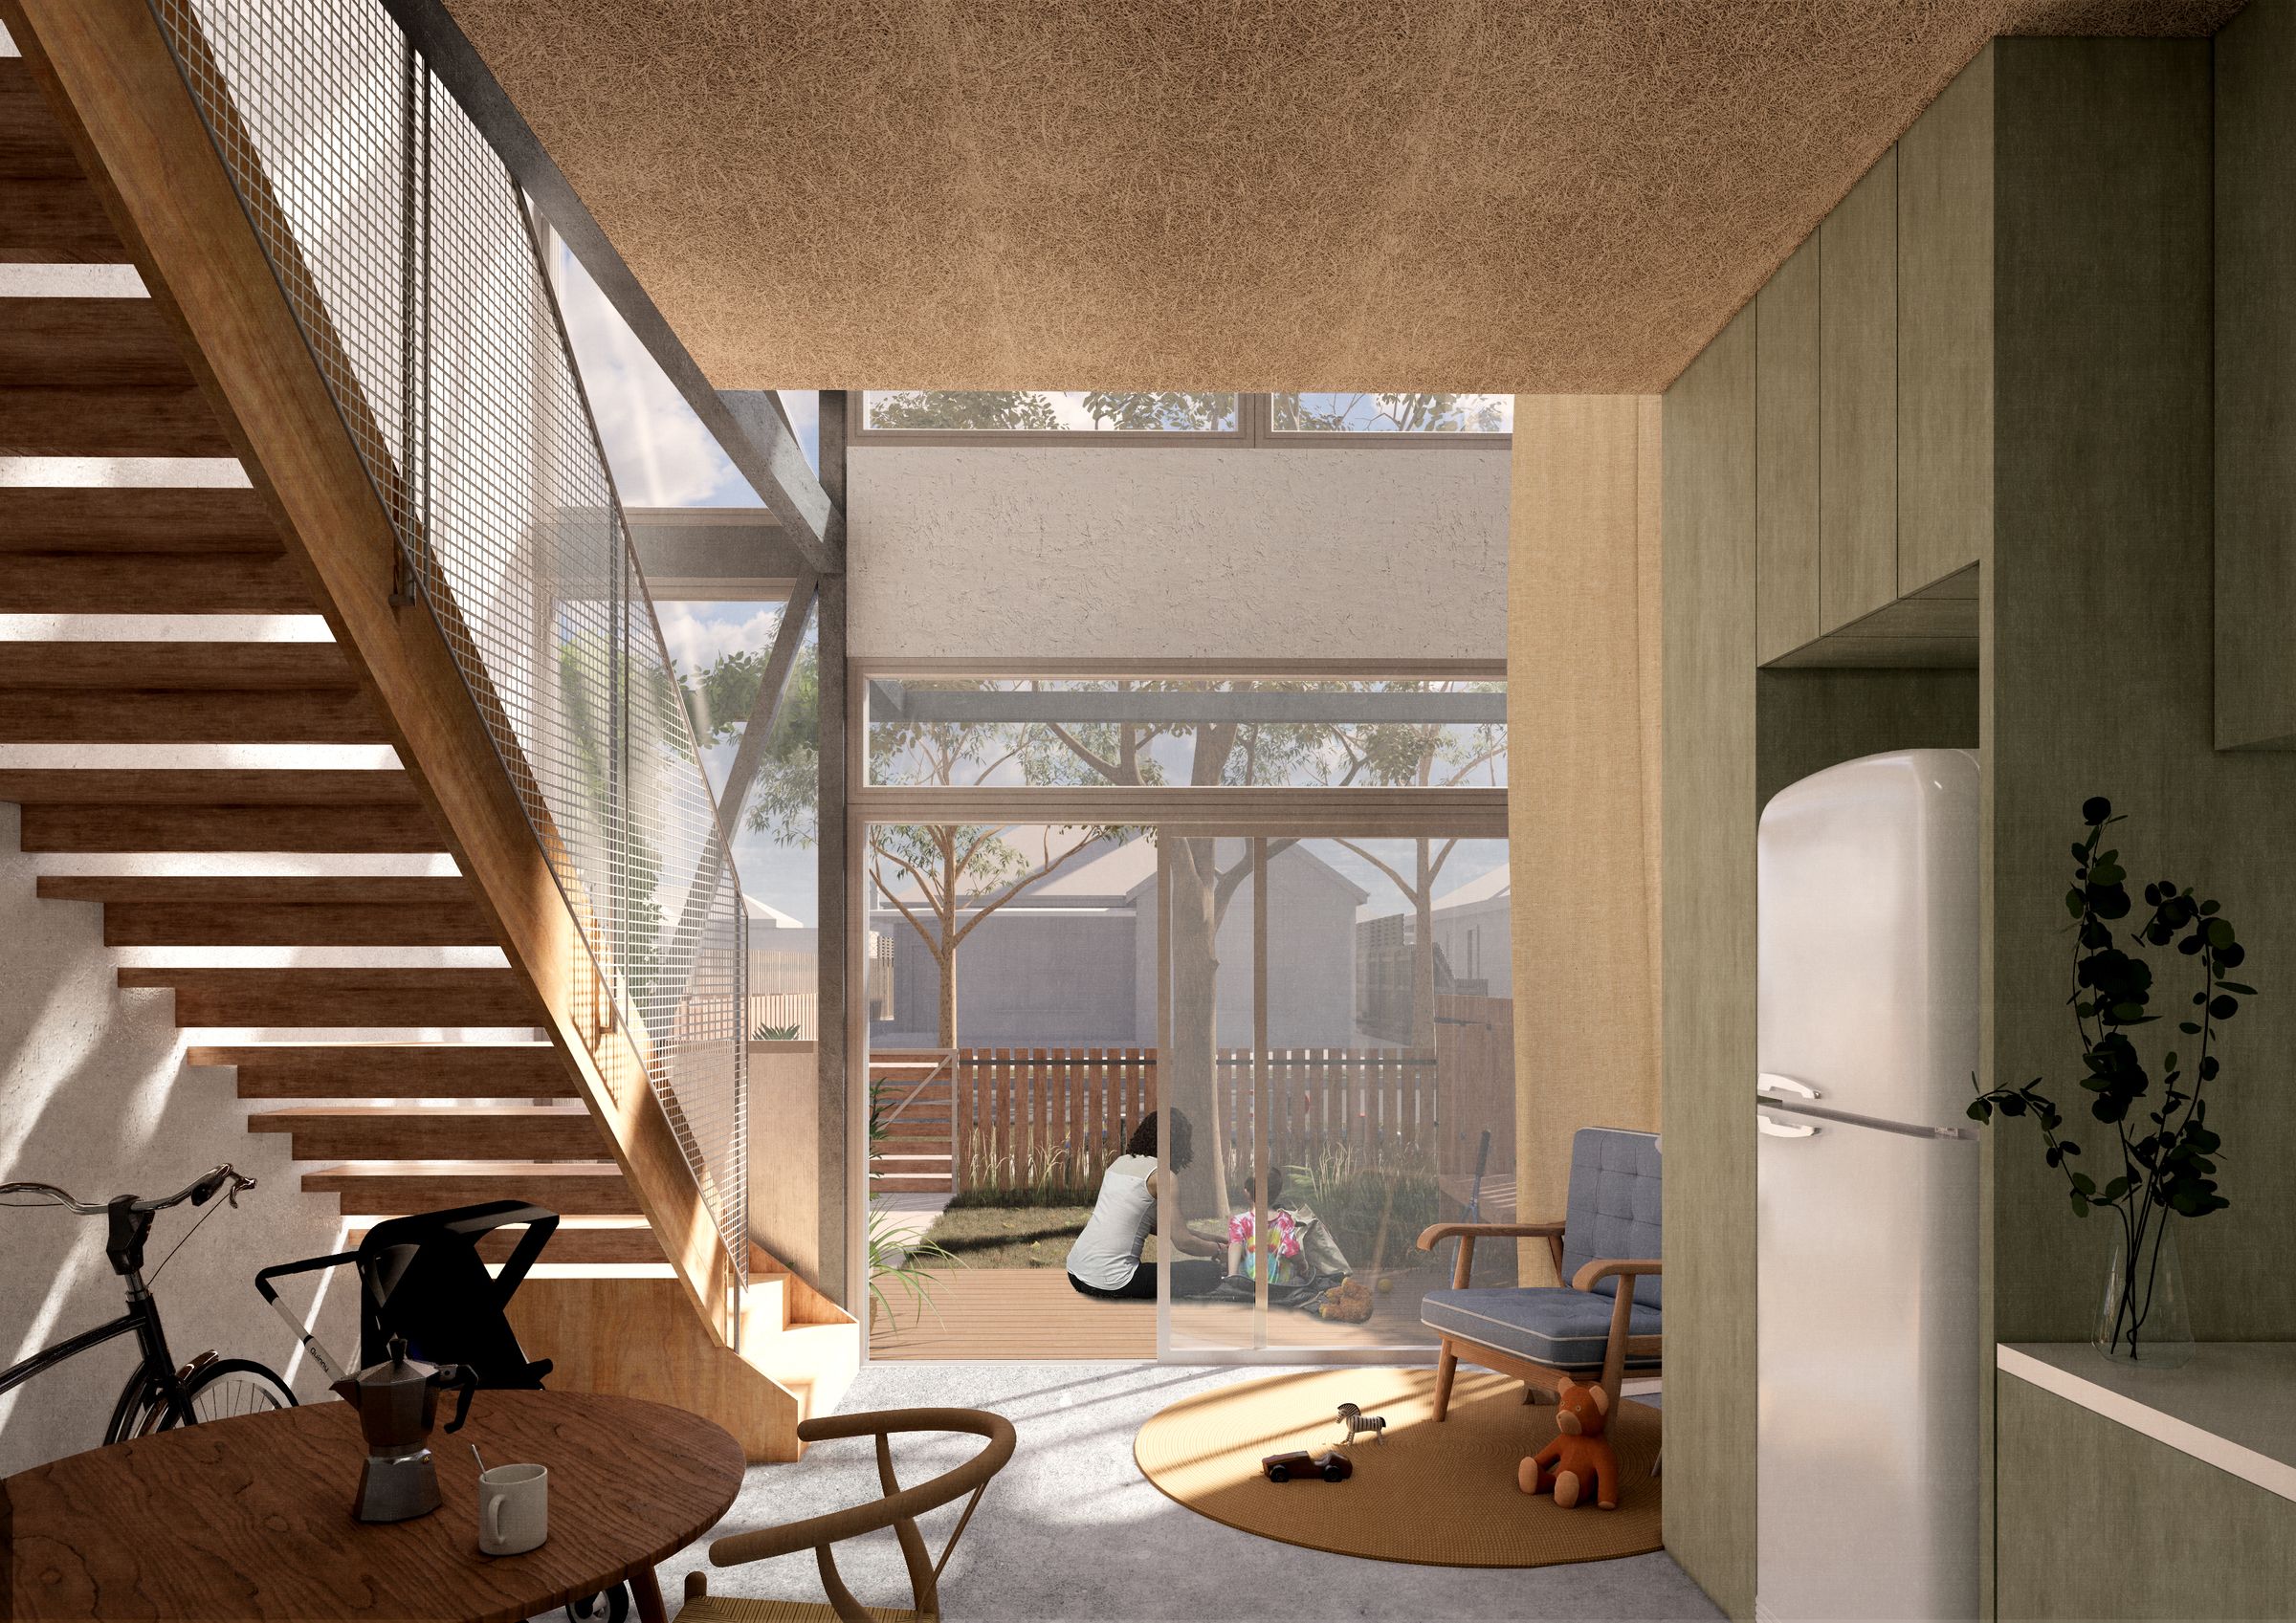 Visualisation of the interior of the Future Homes Exemplar Project. The image shows a light filled open plan living area and kitchen with residents sitting on a small deck out the front for the home.